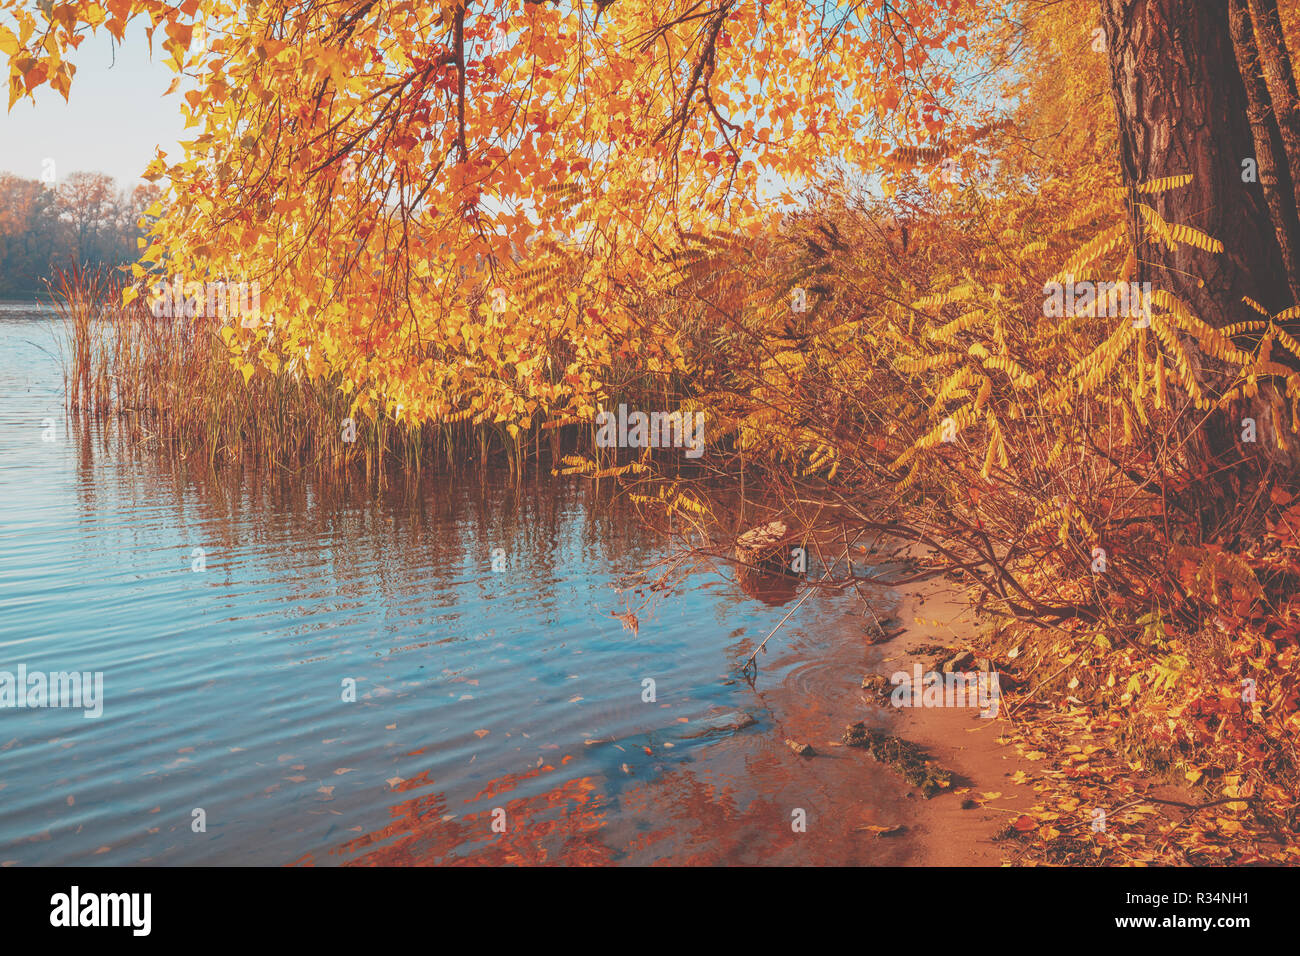 Autumn landscape. The tree bent branches with yellow leaves above the river Stock Photo